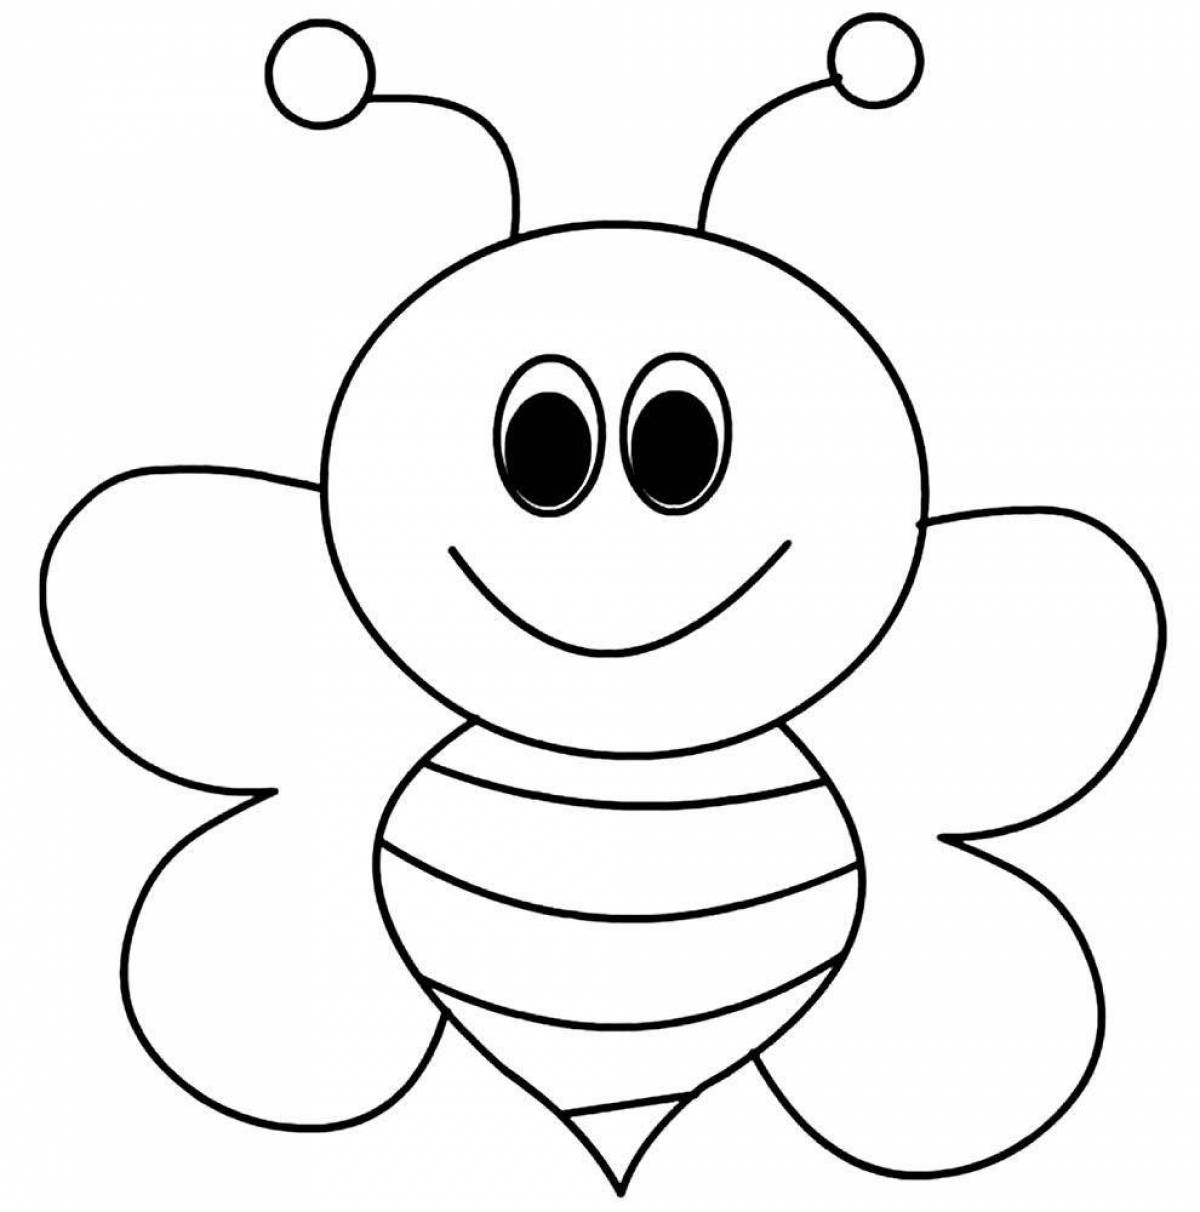 Incredible bee coloring book for kids